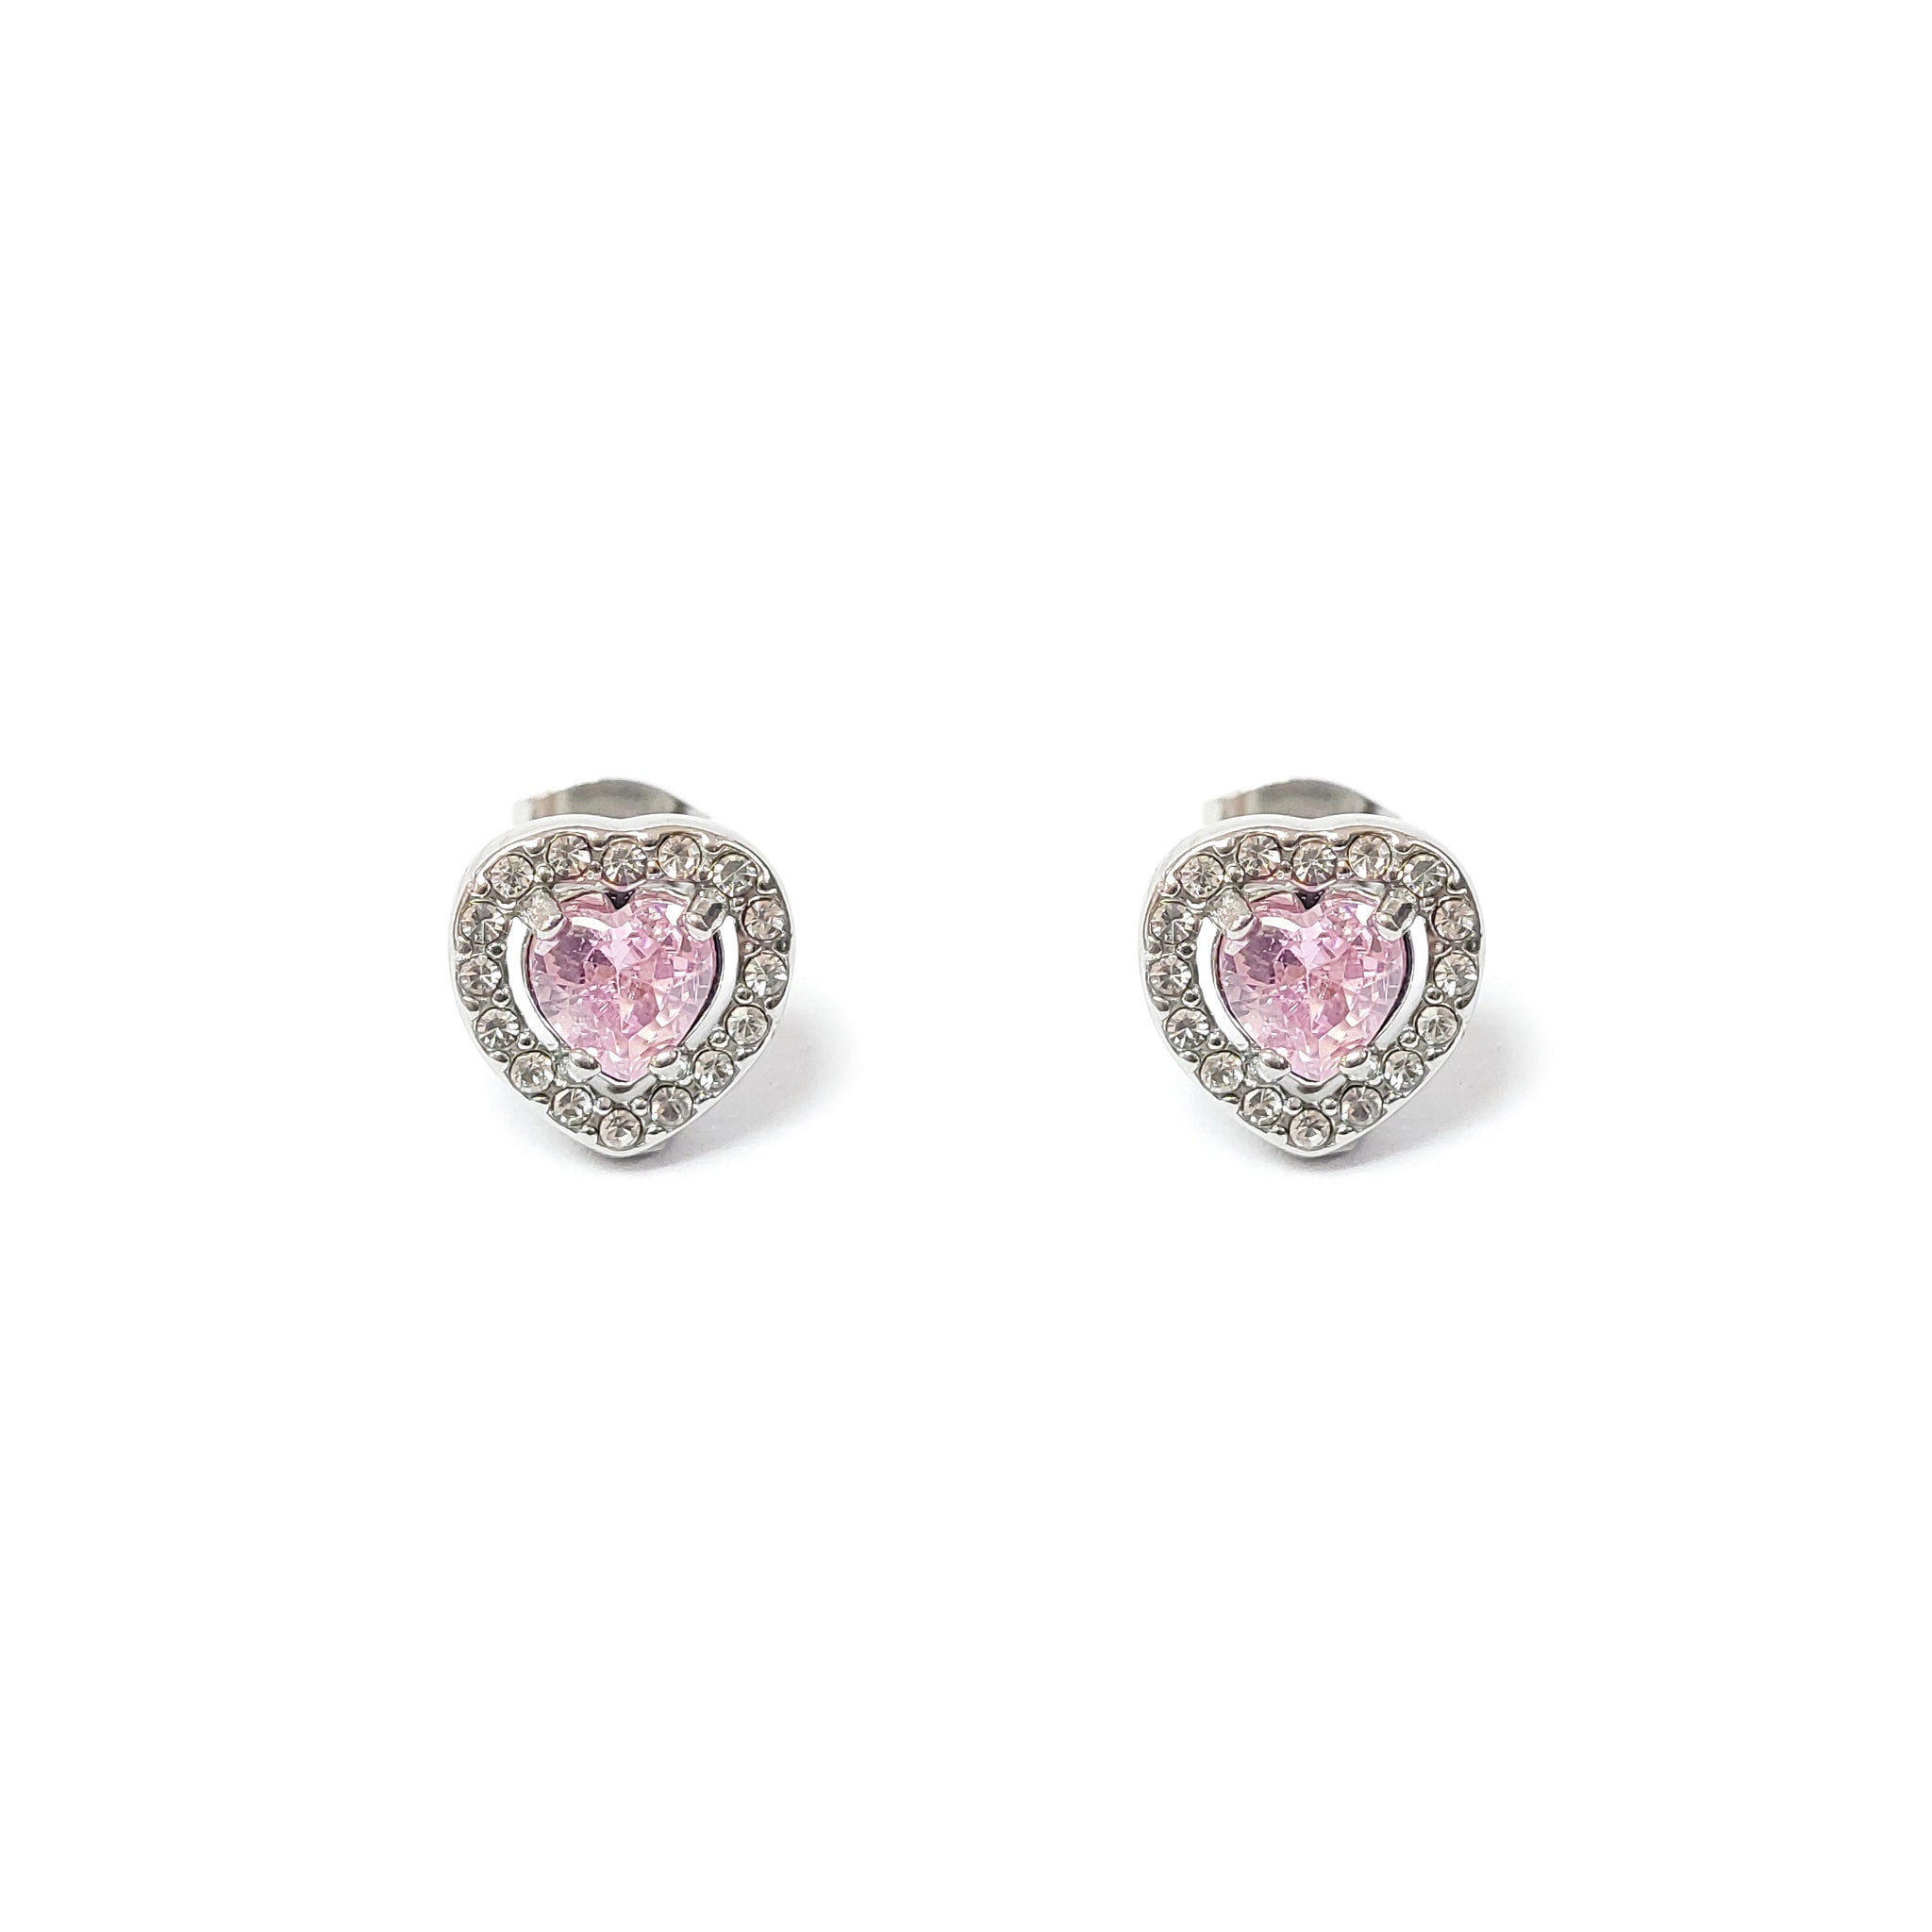 ESE 7931: Enclosed Cz-Studded Baby Pink Heart Cz Earrings